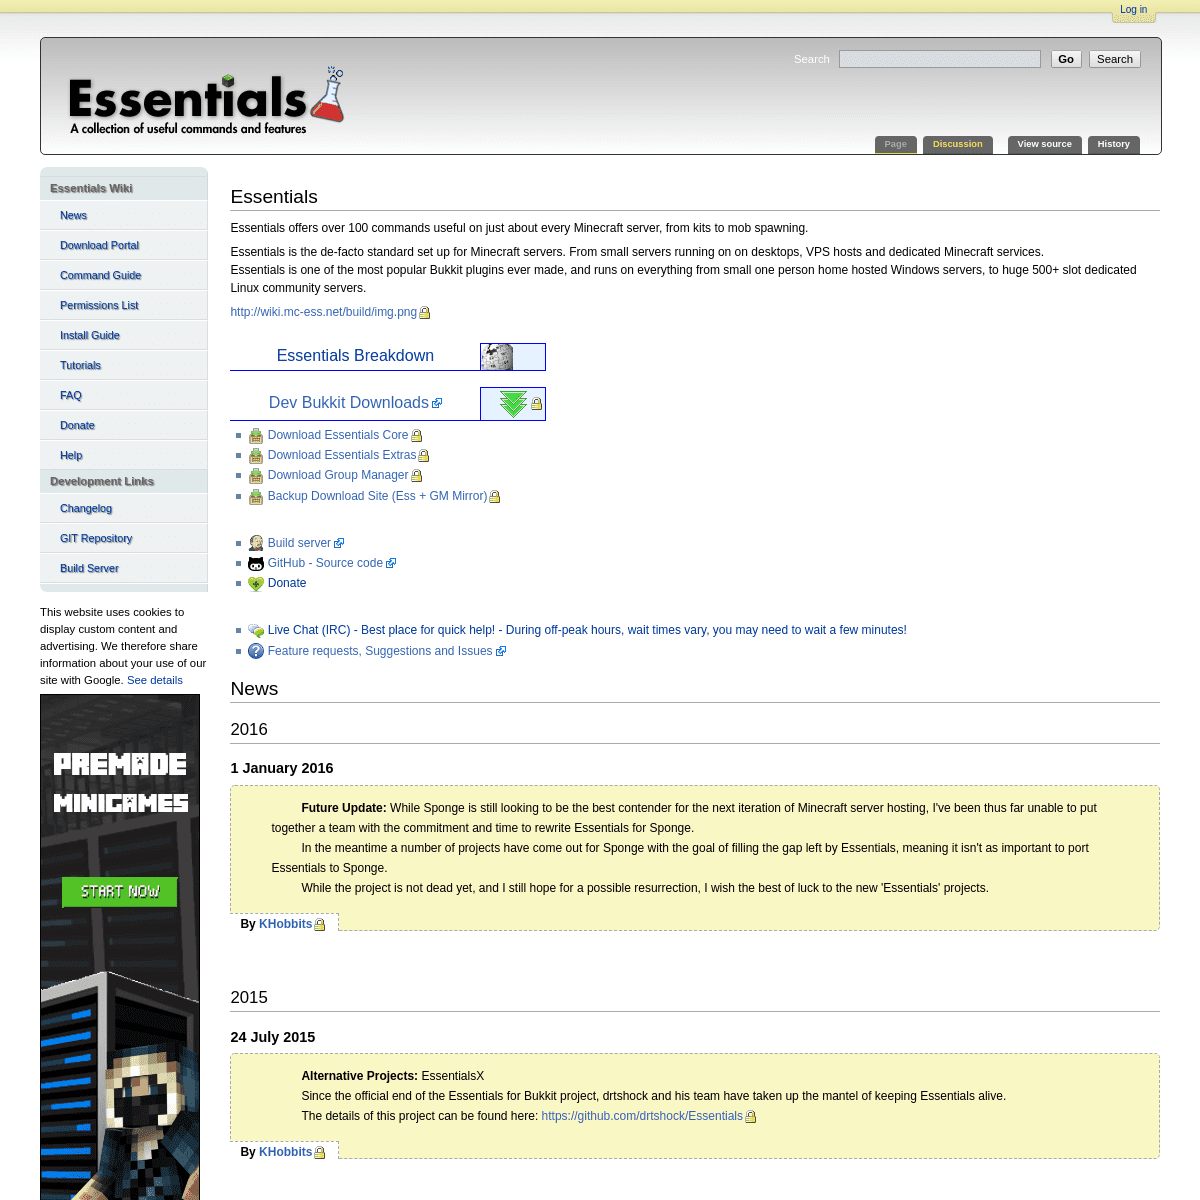 A complete backup of ess3.net